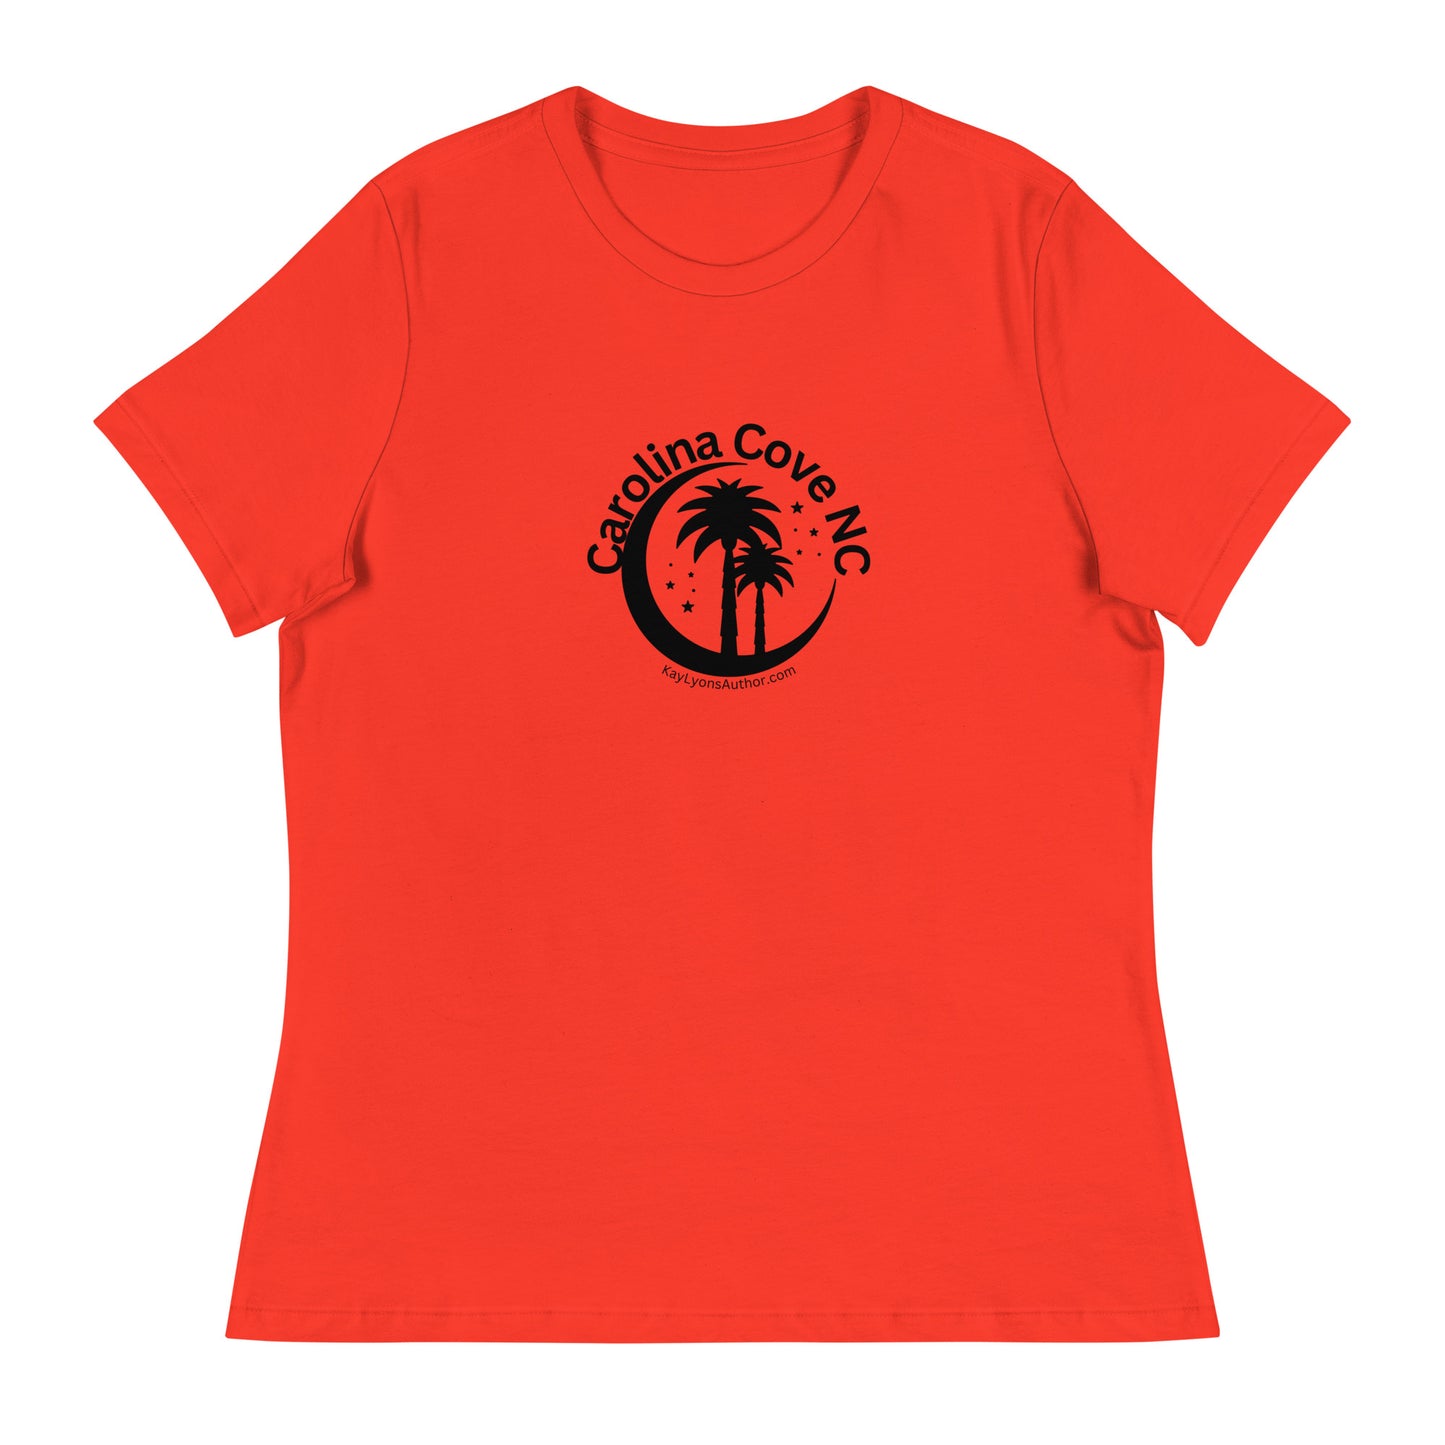 Women's Relaxed T-Shirt-FEATURING OUR FAVORITE FICTIONAL TOWN CAROLINA COVE NC